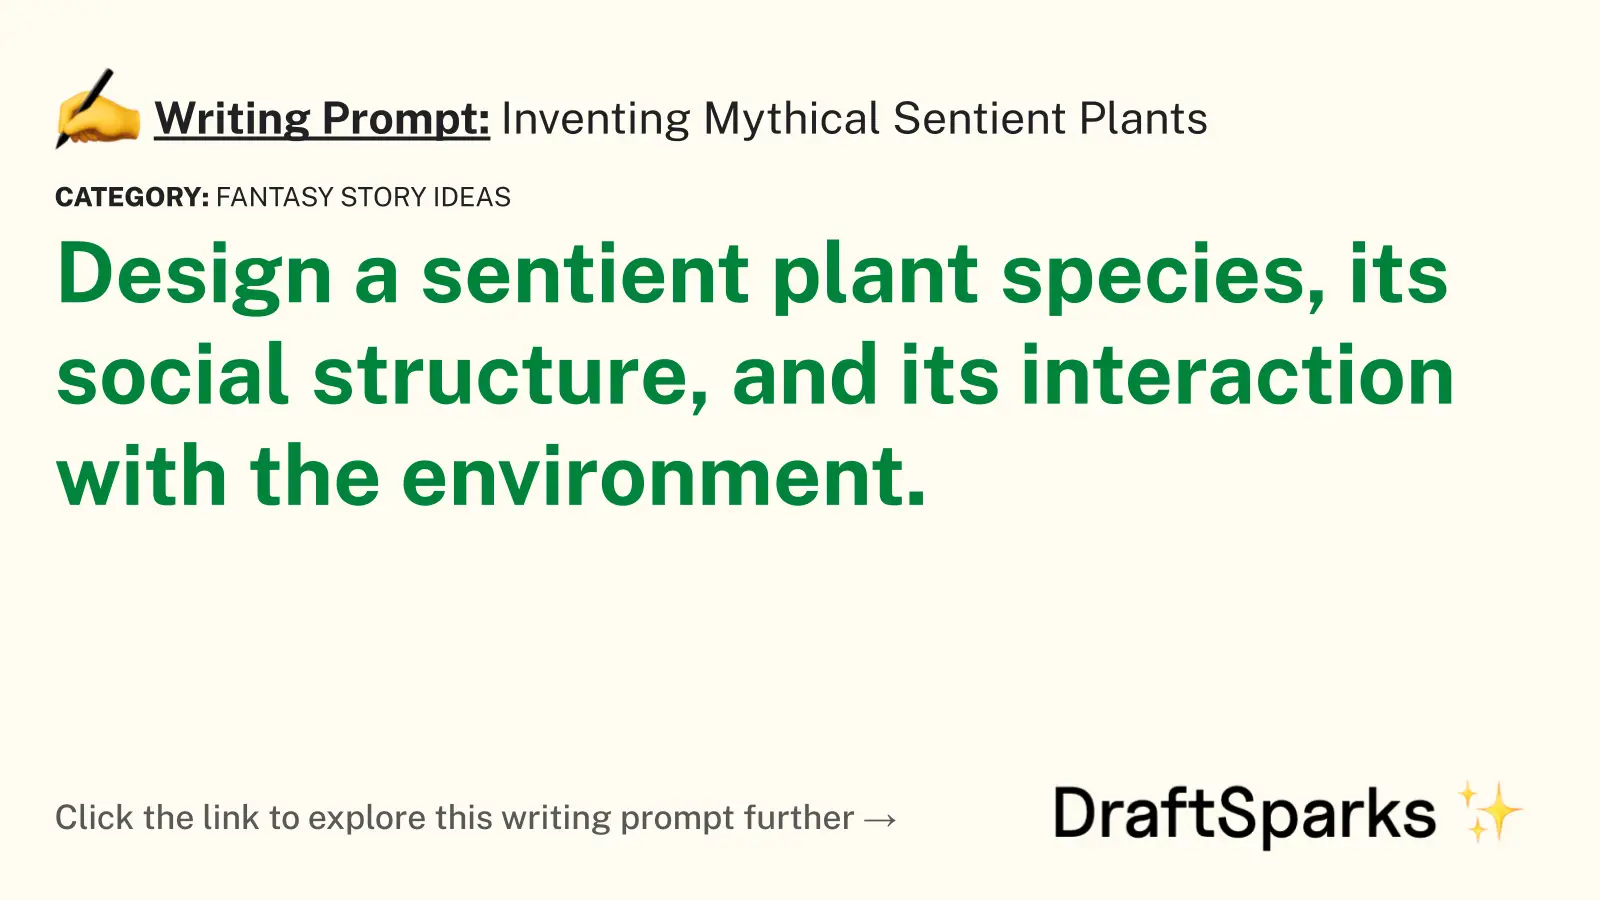 Inventing Mythical Sentient Plants